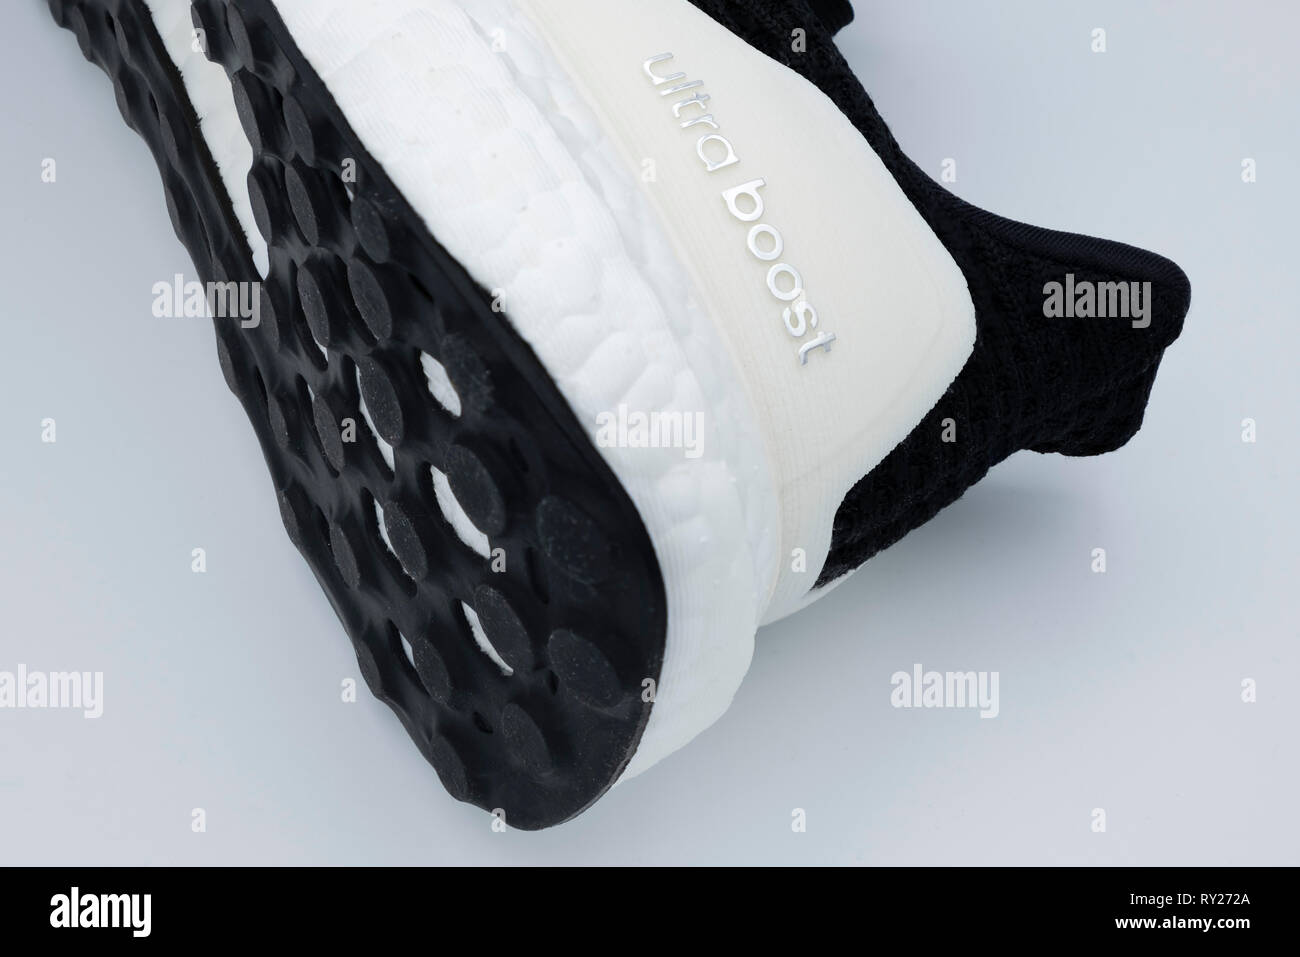 Close up of Adidas Ultra Boost mid sole Stock Photo